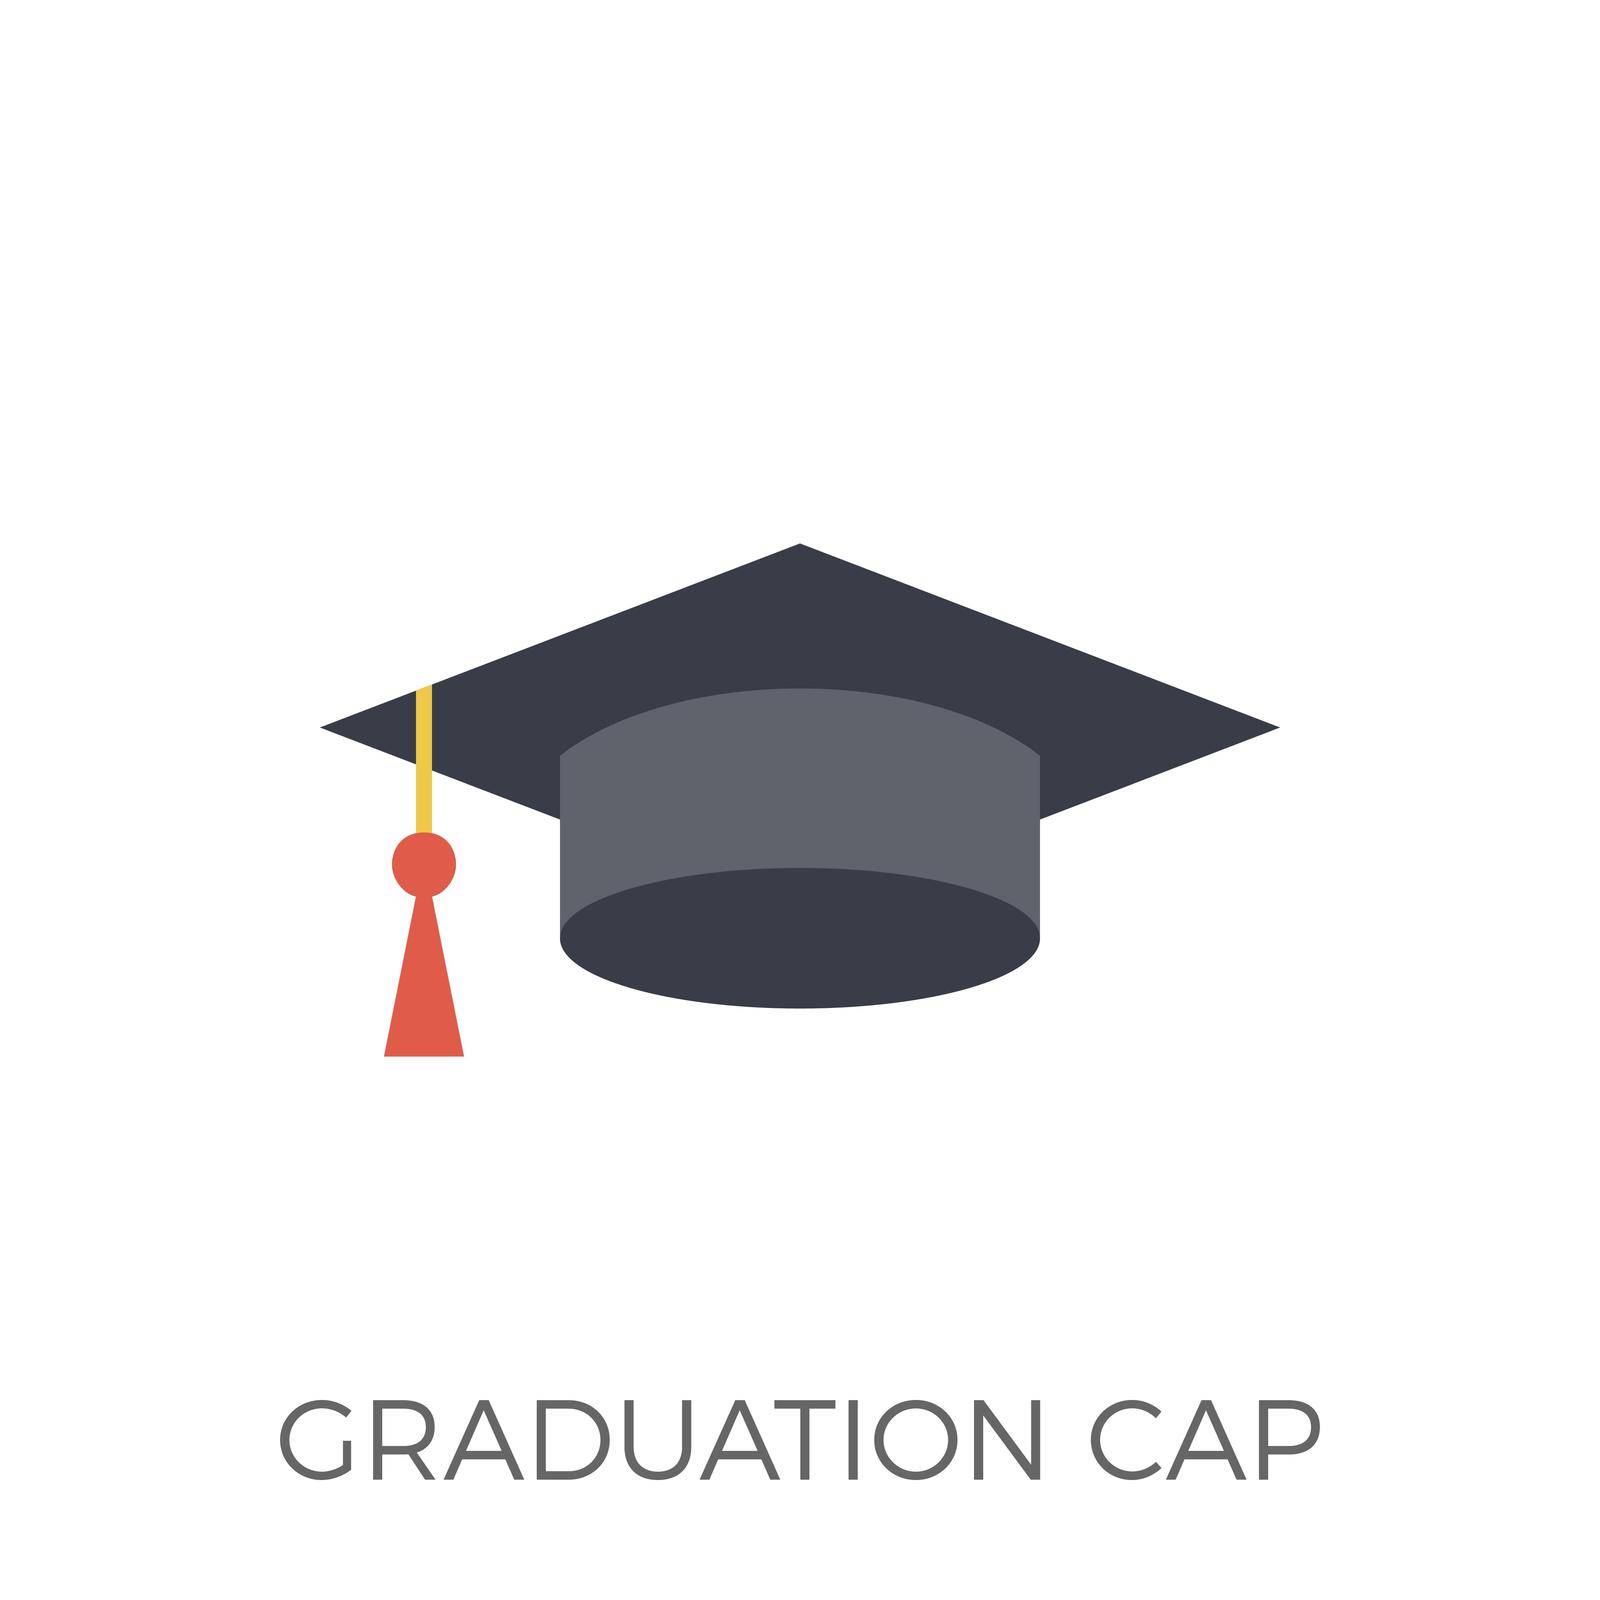 Graduation Cap Icon Vector. Isolated on White Background. Trendy Flat Style.